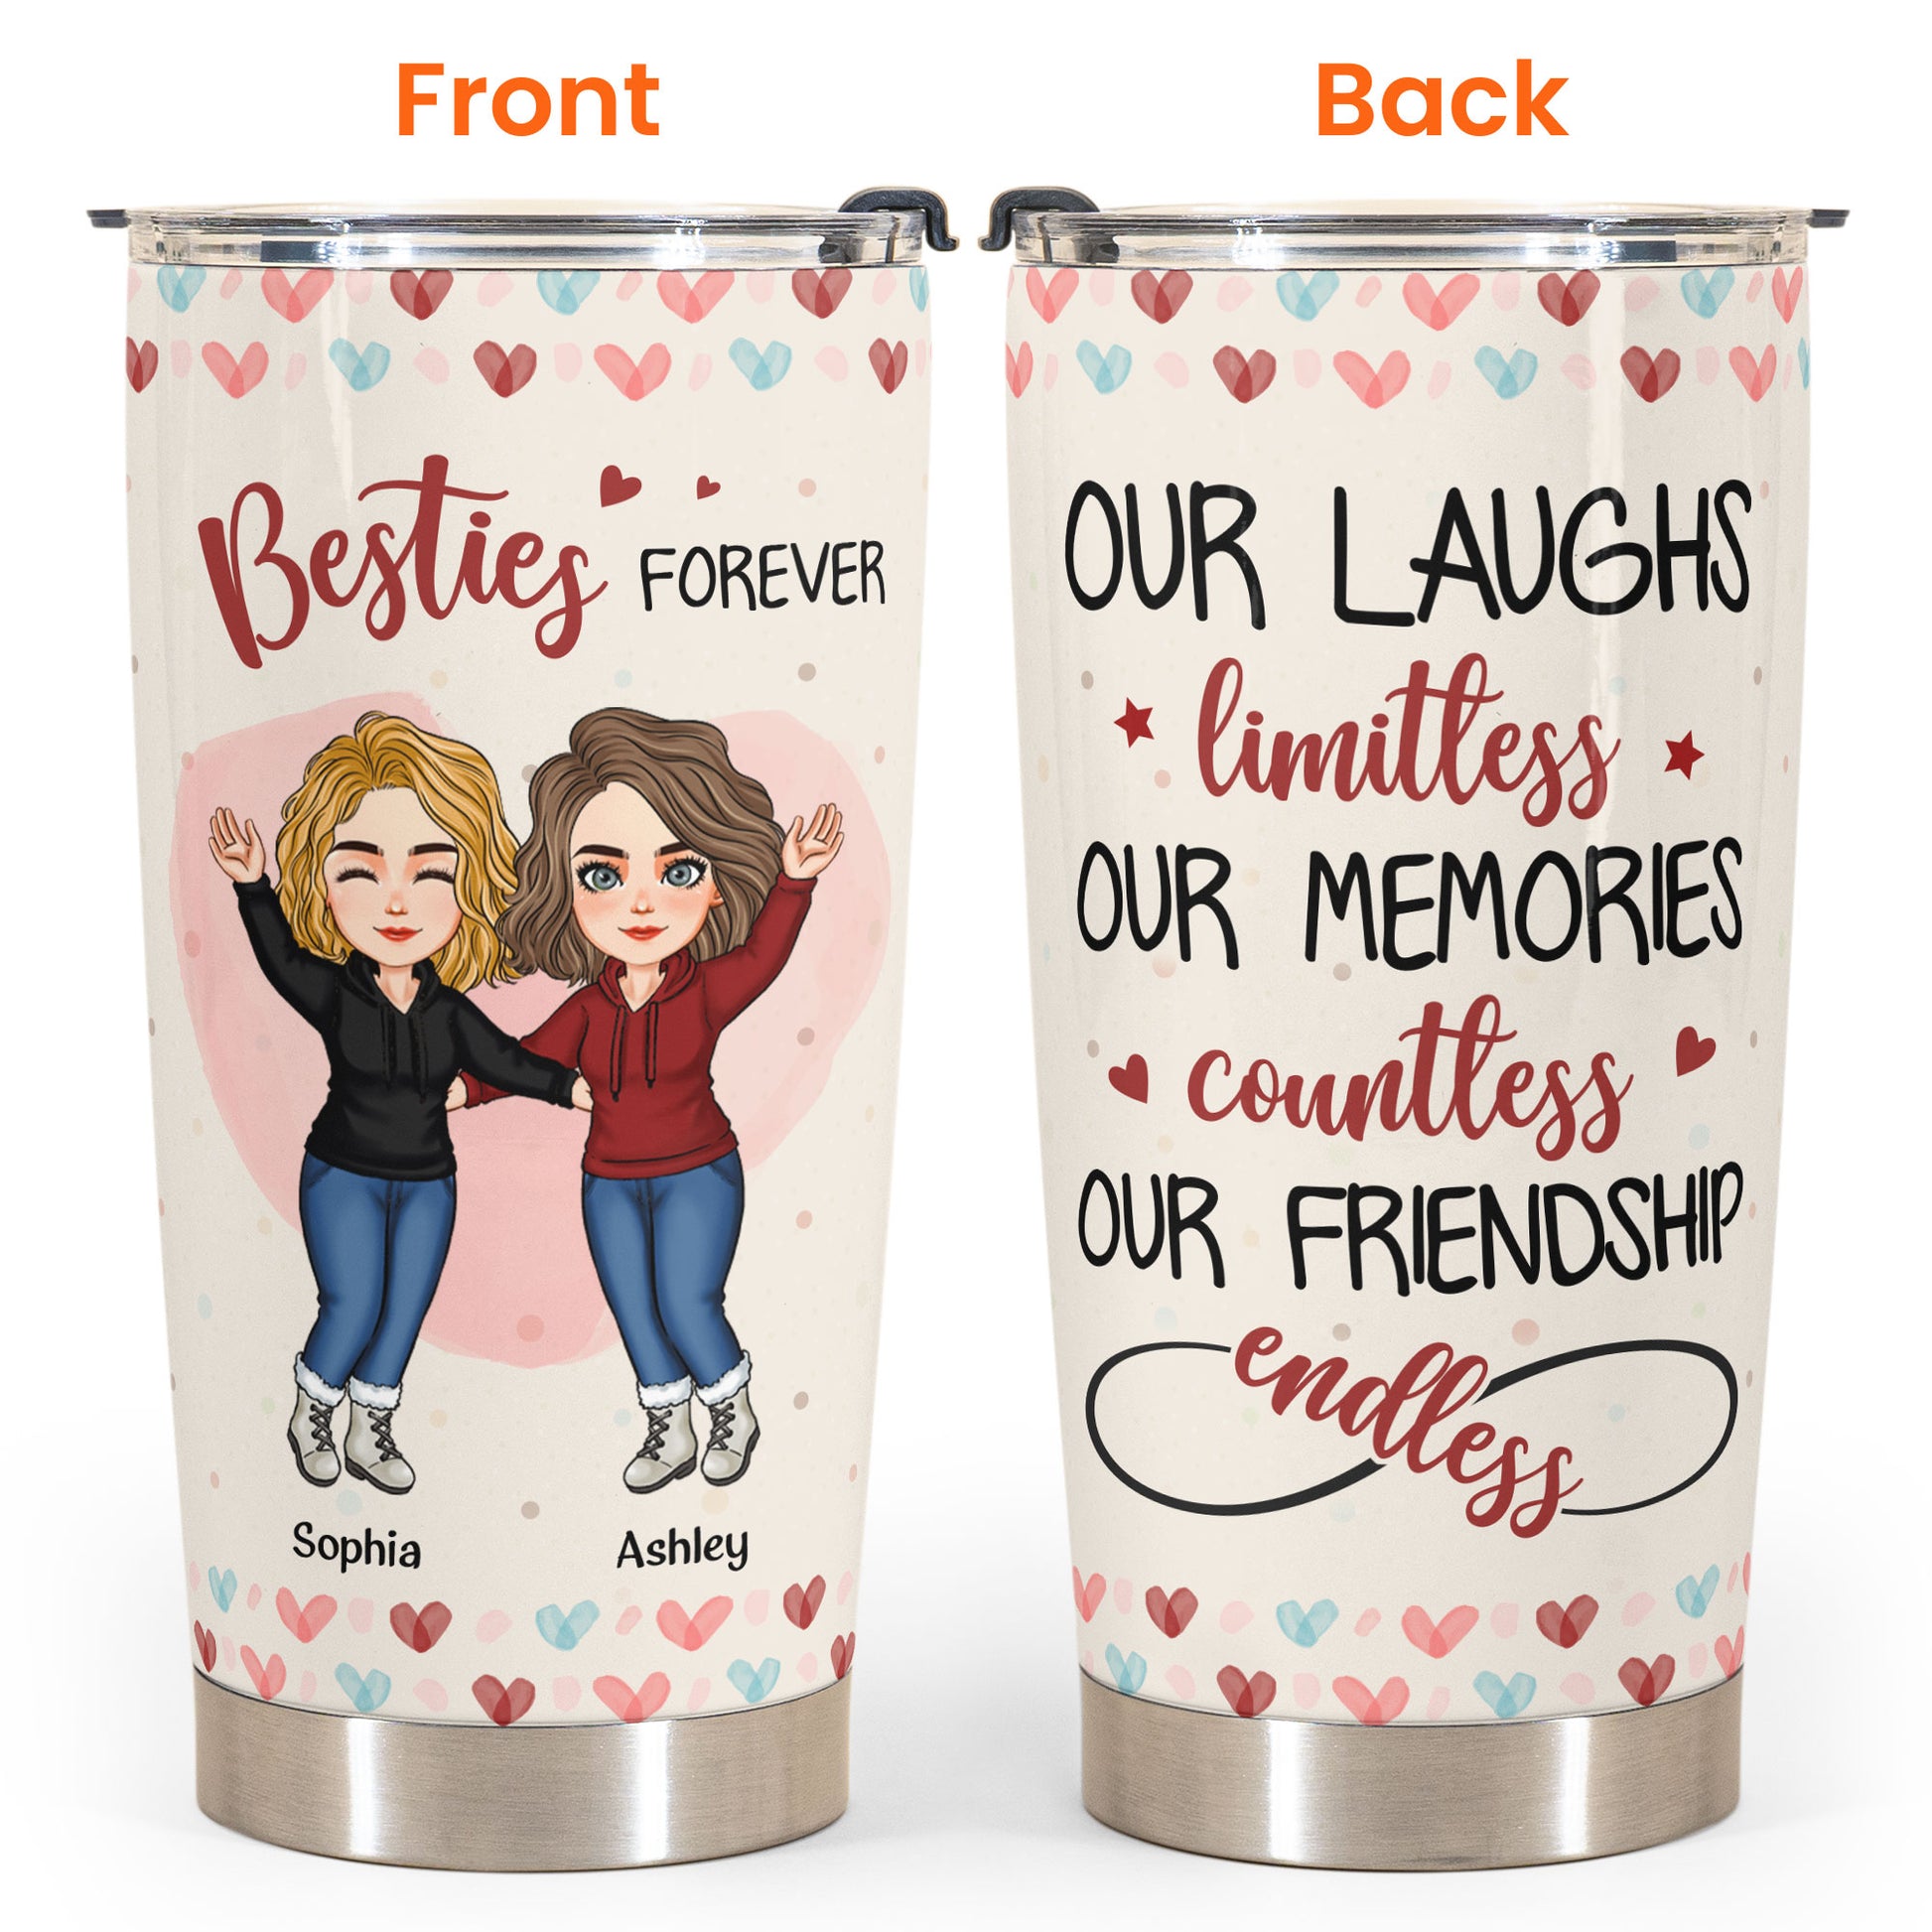 Our Friendship Is Endless - Personalized Tumbler Cup - Birthday, Funny Gift  For Besties, BFF, Best Friends, Soul Sisters